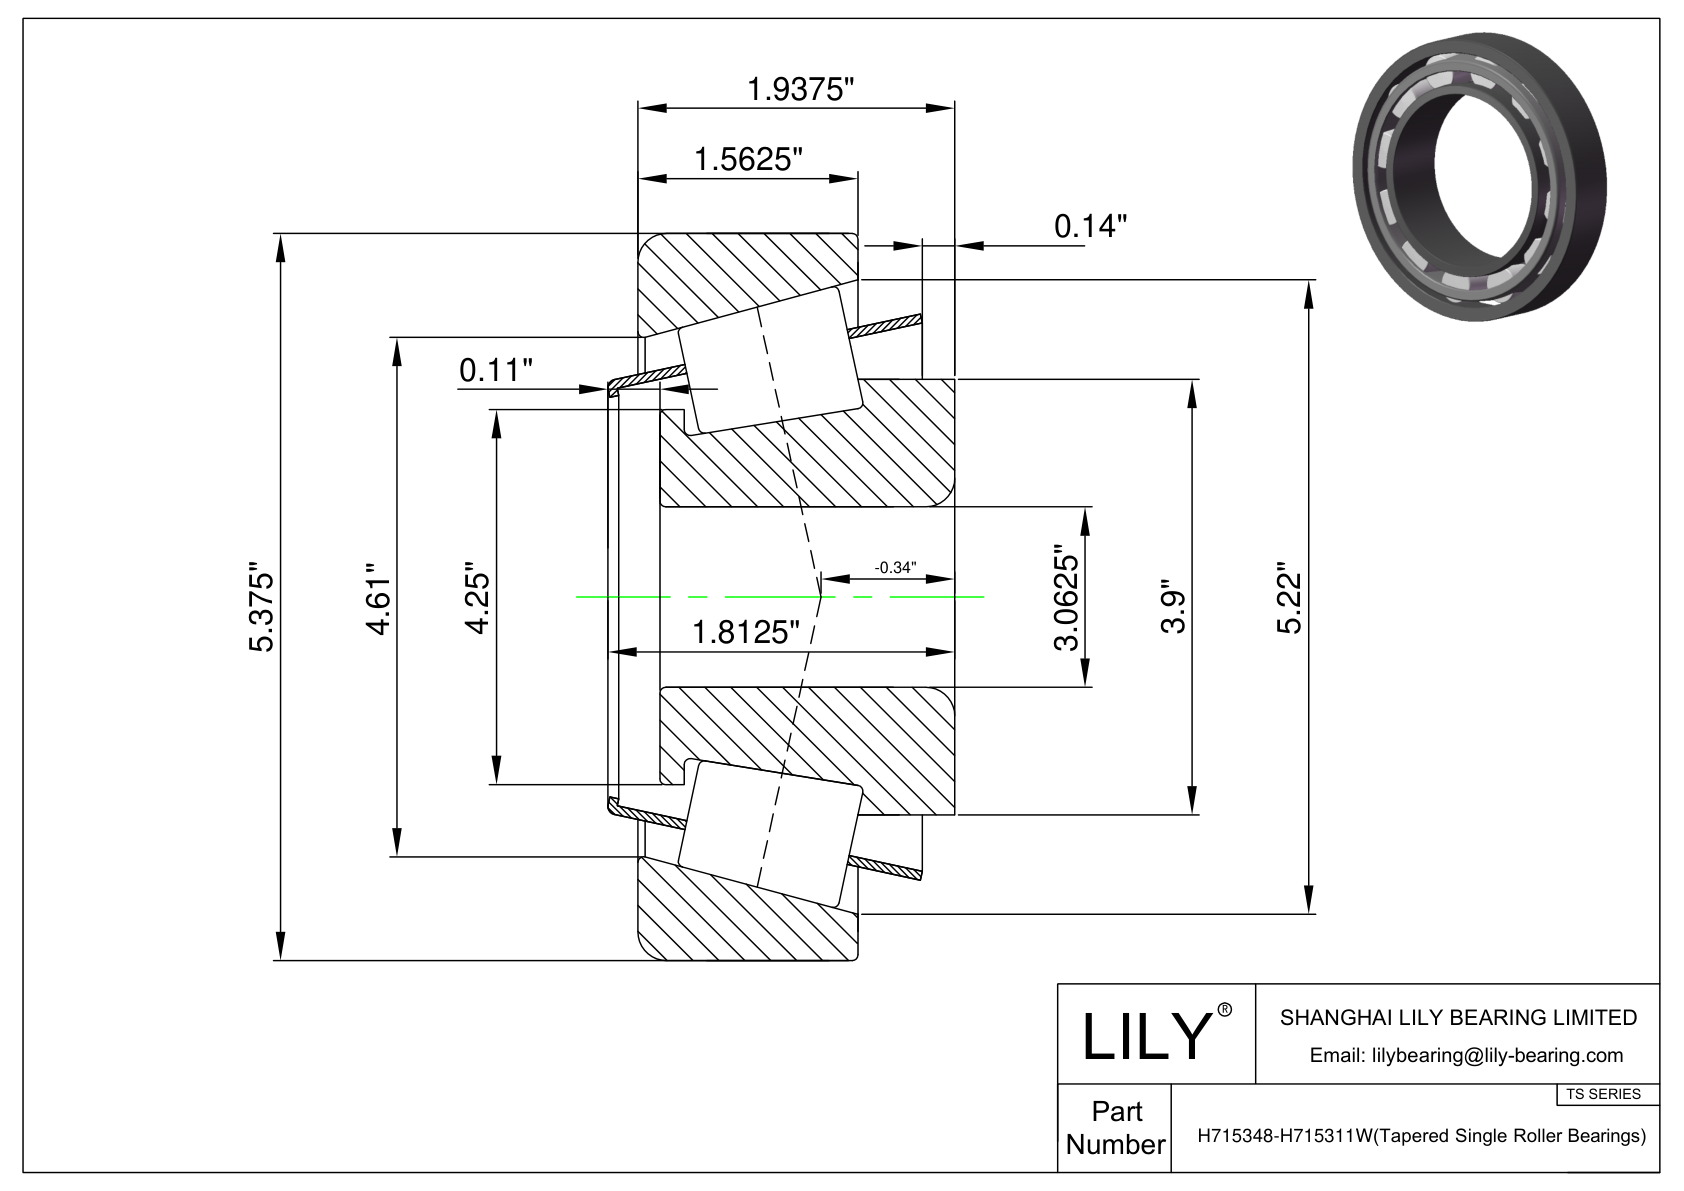 H715348-H715311W TS (Tapered Single Roller Bearings) (Imperial) cad drawing